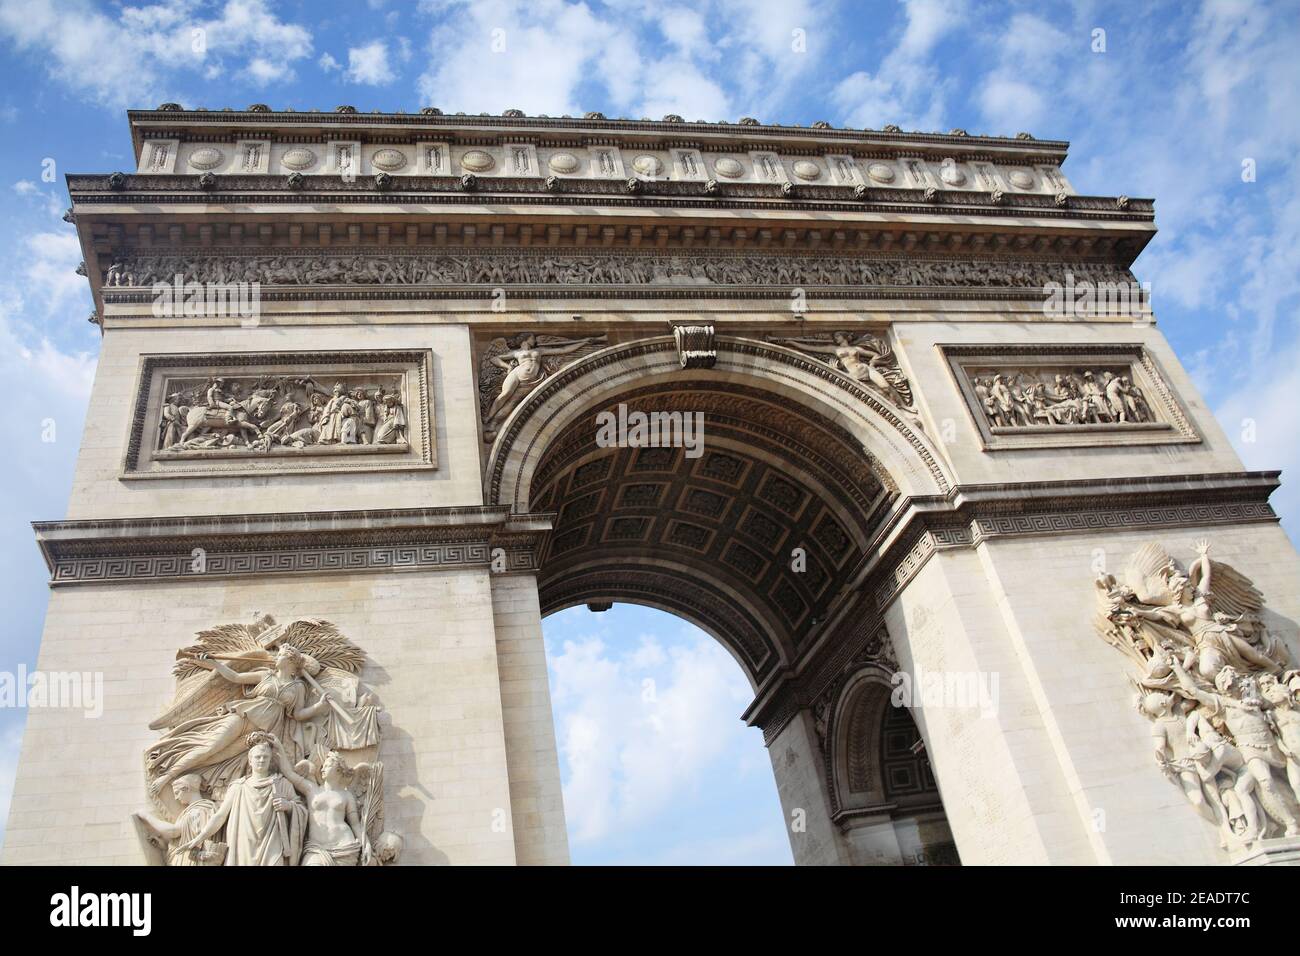 The Arc De Triomphe in Paris France a French national landmark which is a popular tourist travel destination attraction, stock photo image Stock Photo